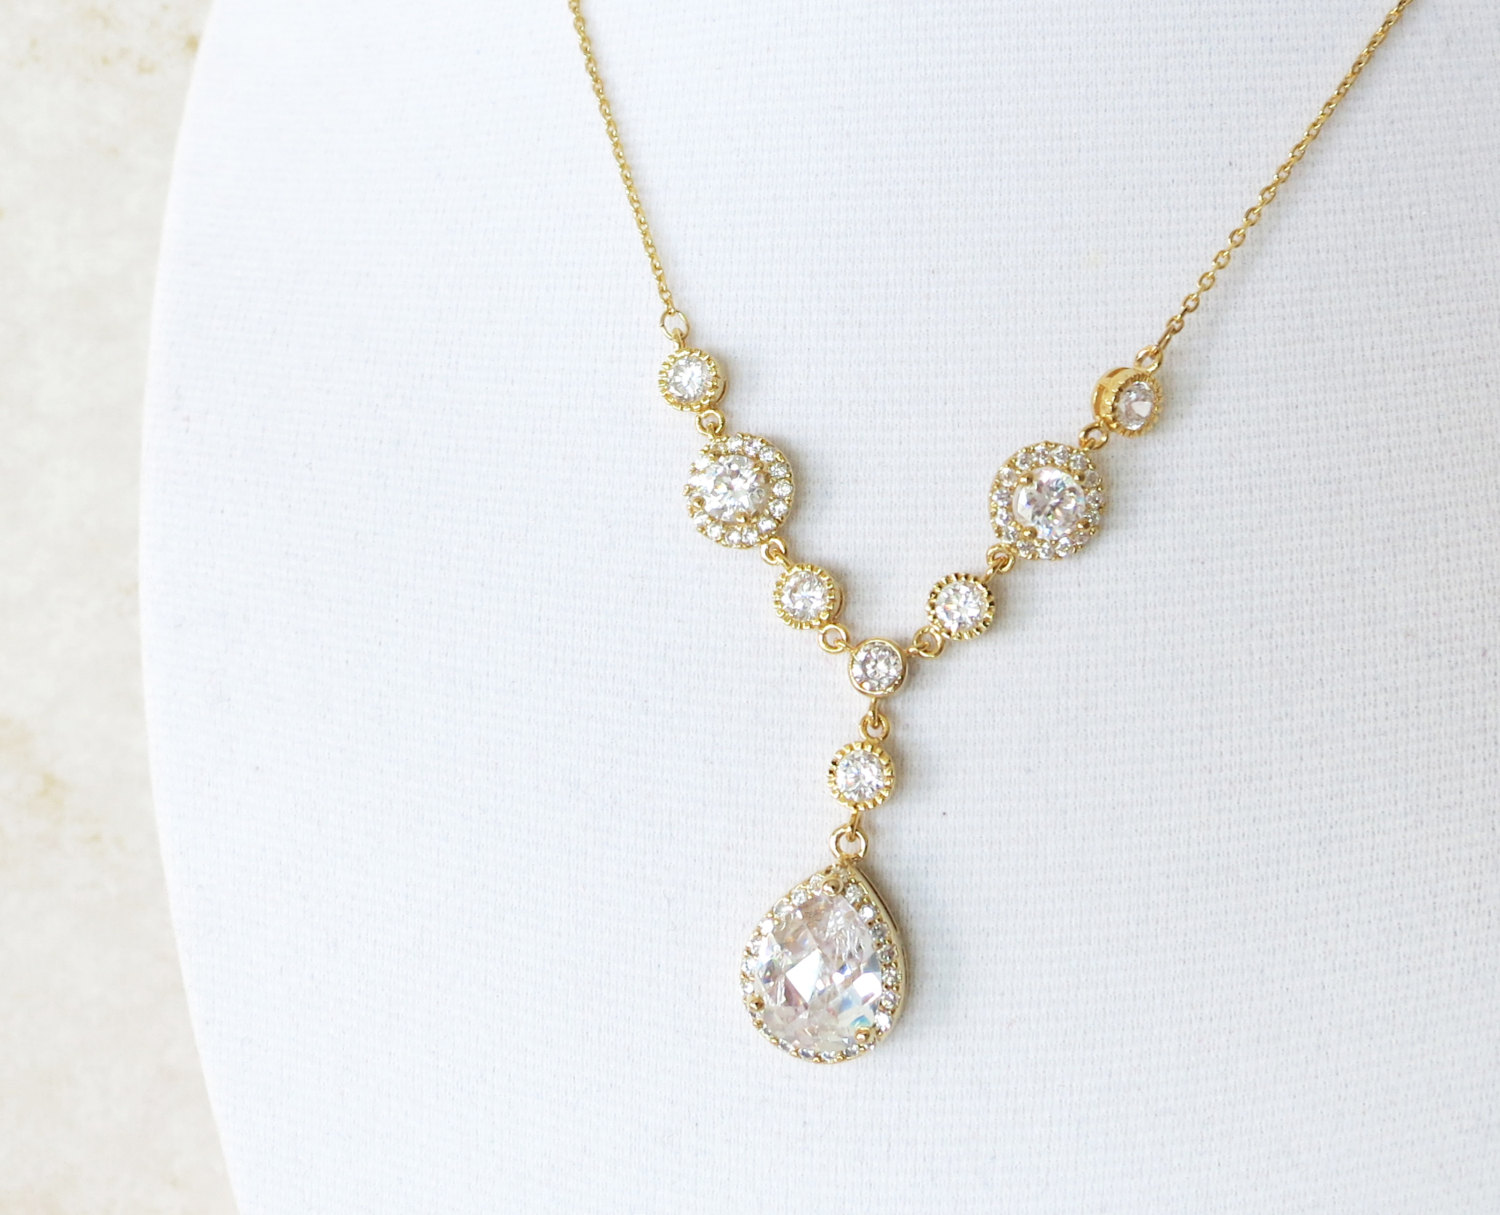 Gold and Crystal Necklace from Glitz & Love